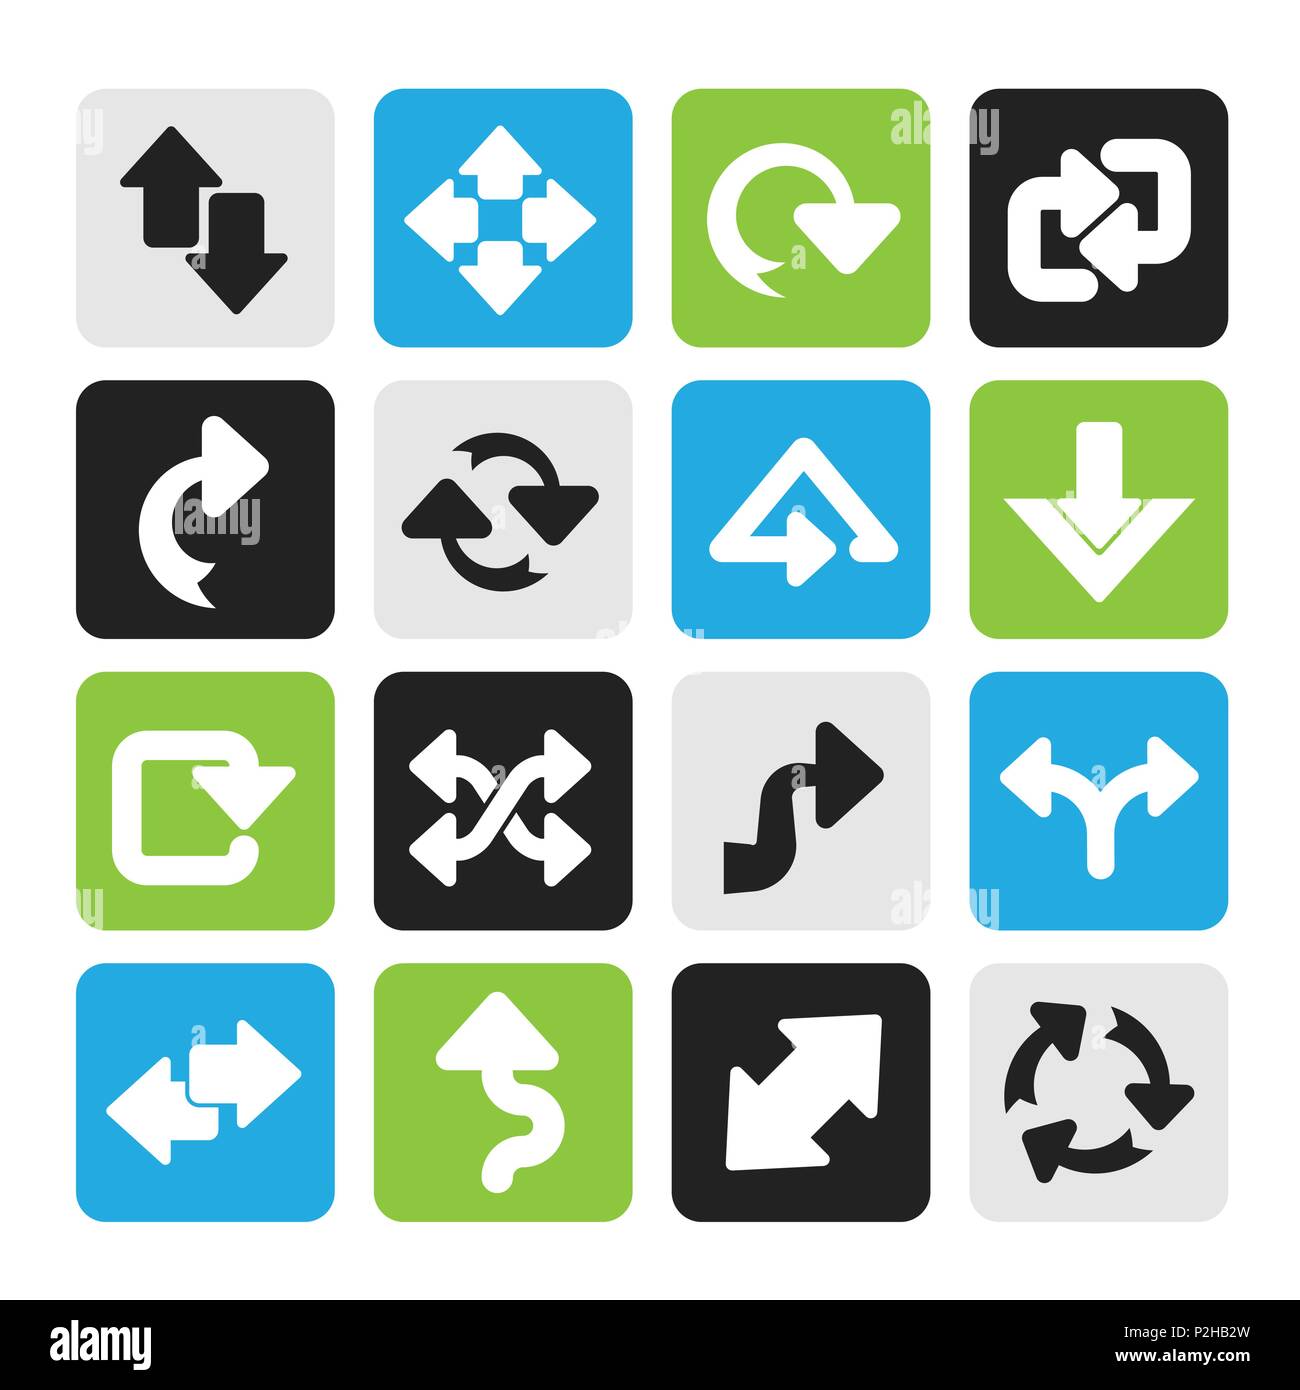 Silhouette different kind of arrows icons - vector icon set Stock Vector